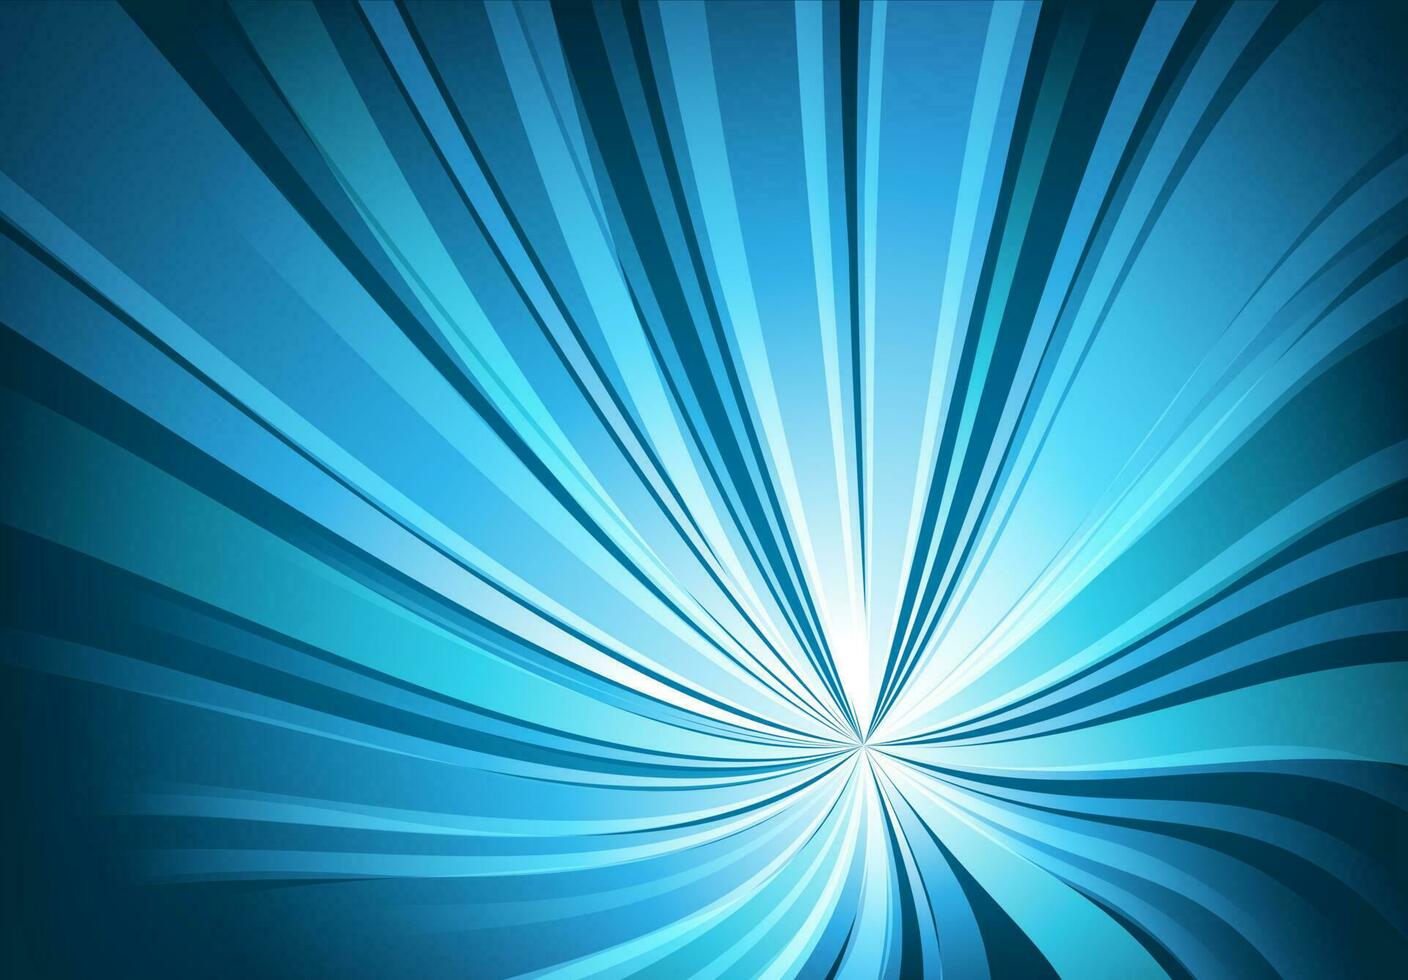 Abstract Blue Light Twisted Background, Vector Illustration